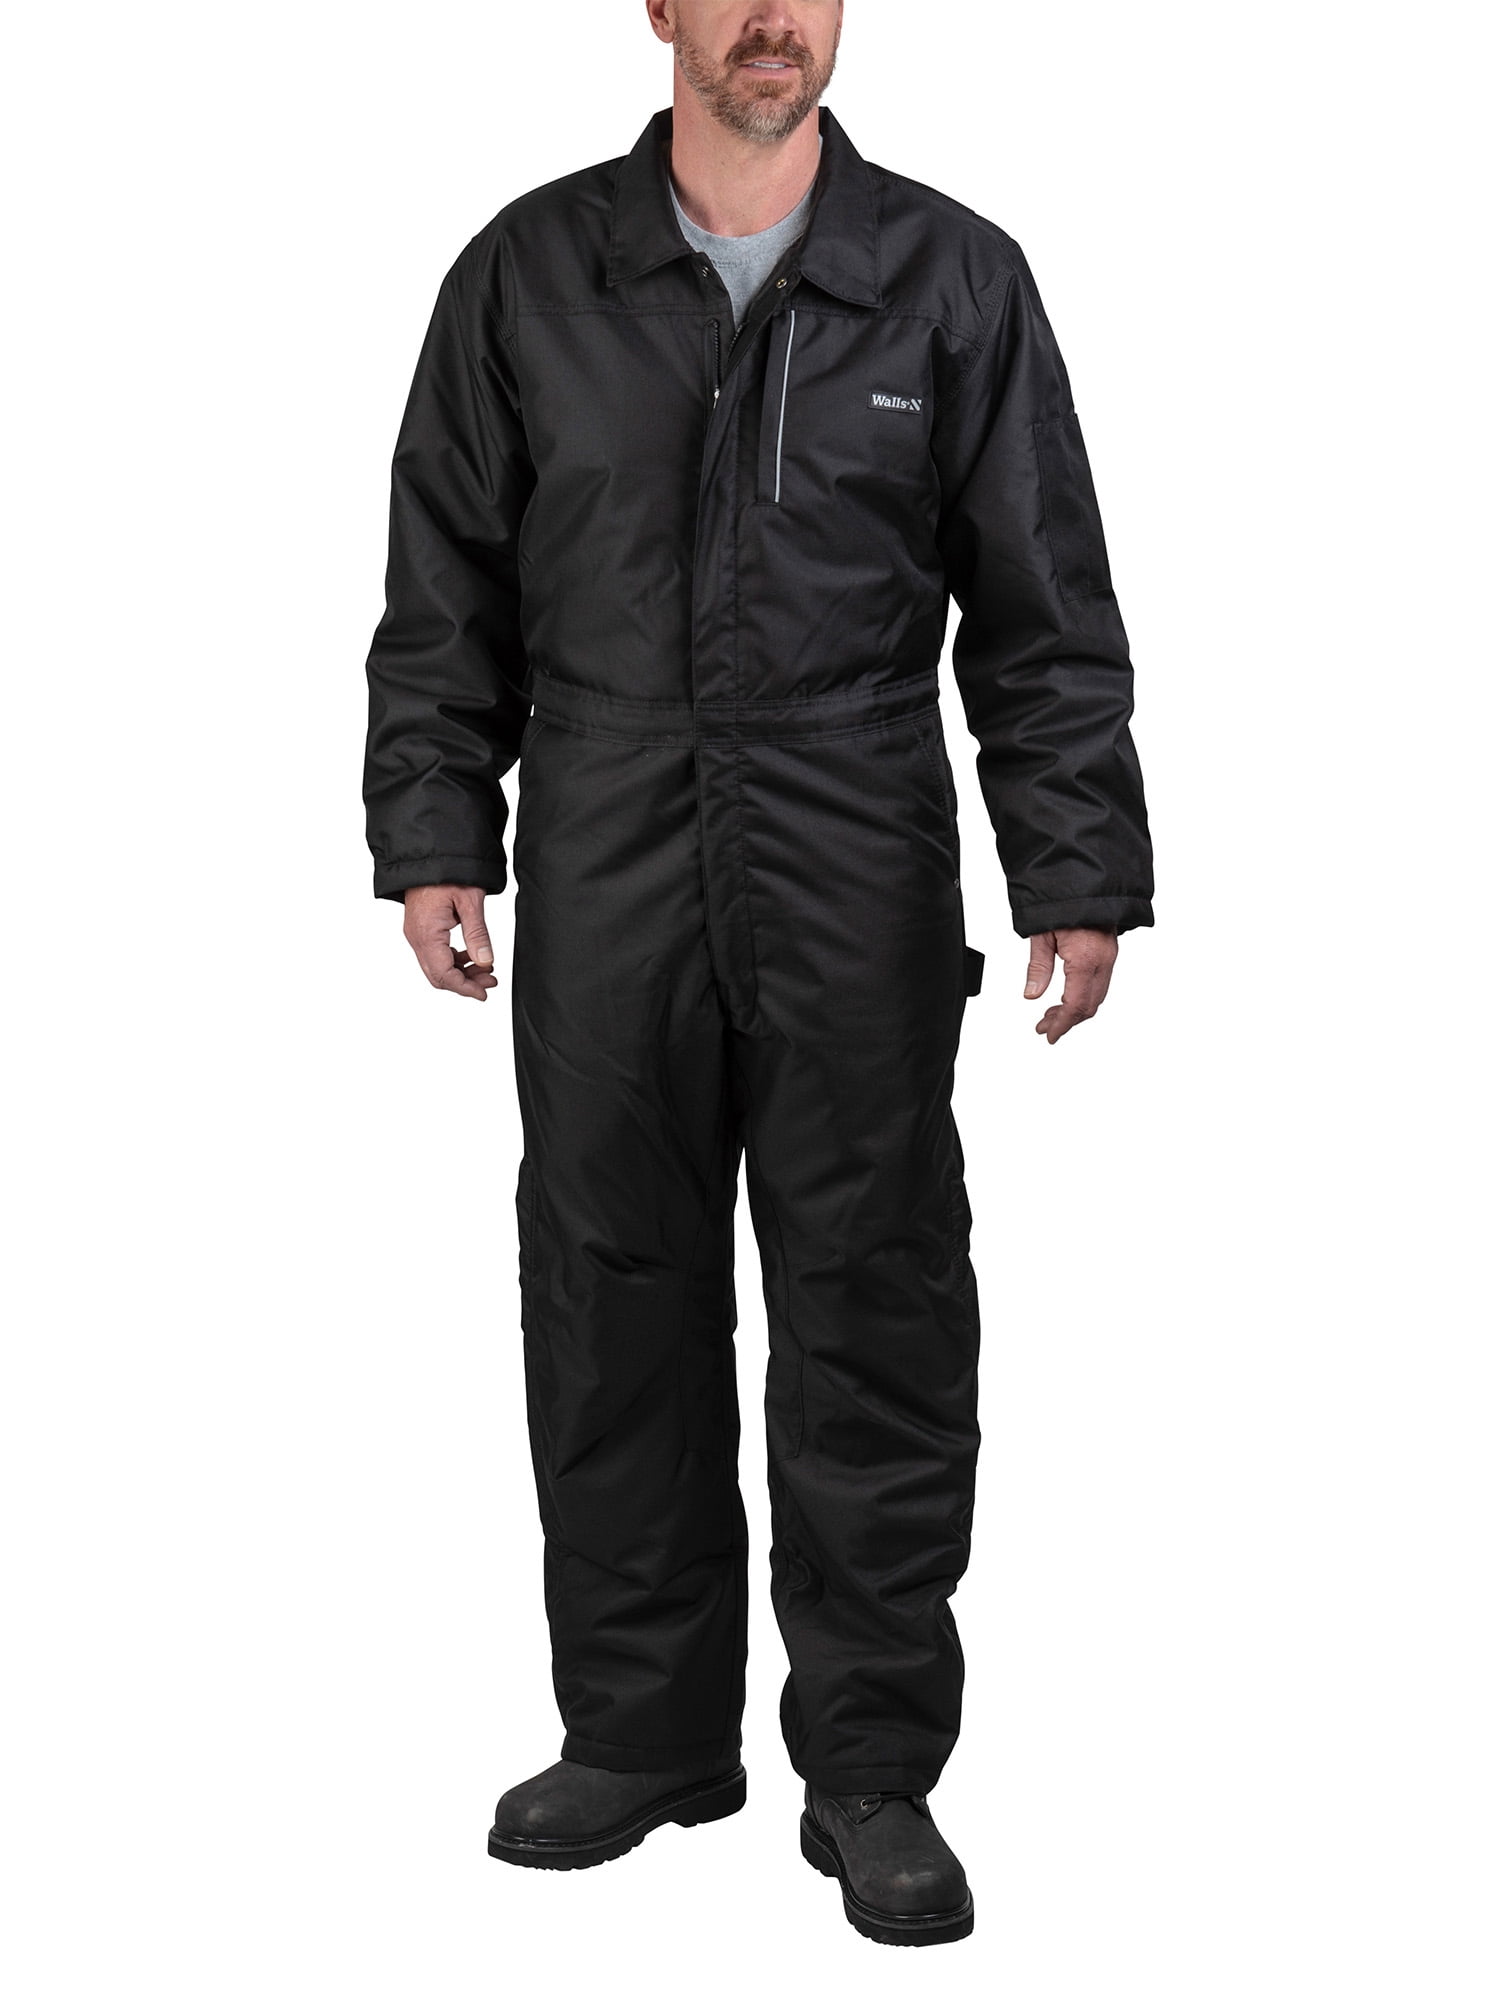 Walls Men's Poly Insulated Coverall - Walmart.com